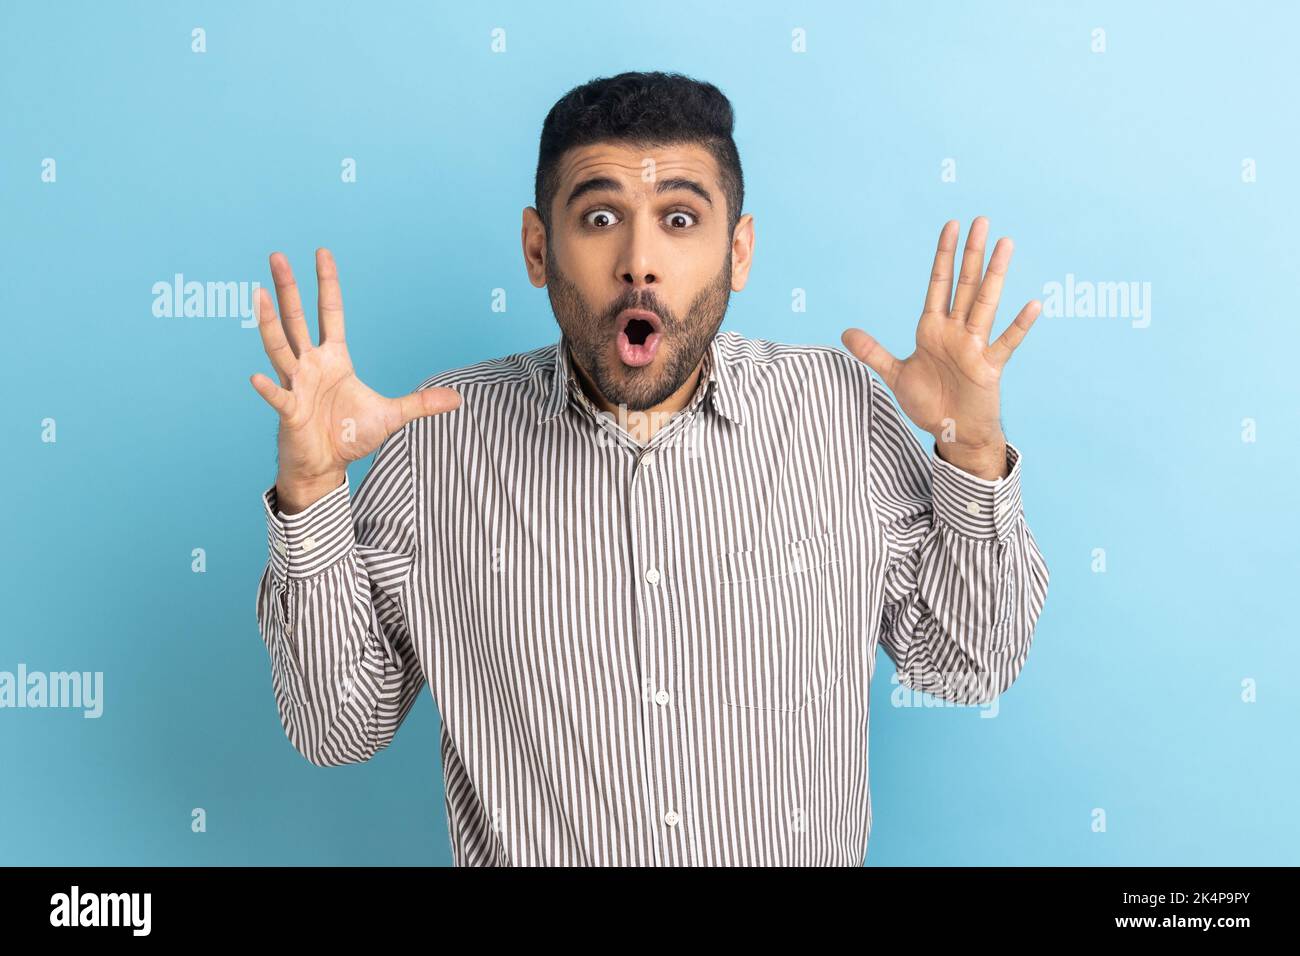 Portrait of surprised astonished bearded businessman standing with open mouth and raised arms, being impressed of shocking news, wearing striped shirt. Indoor studio shot isolated on blue background. Stock Photo